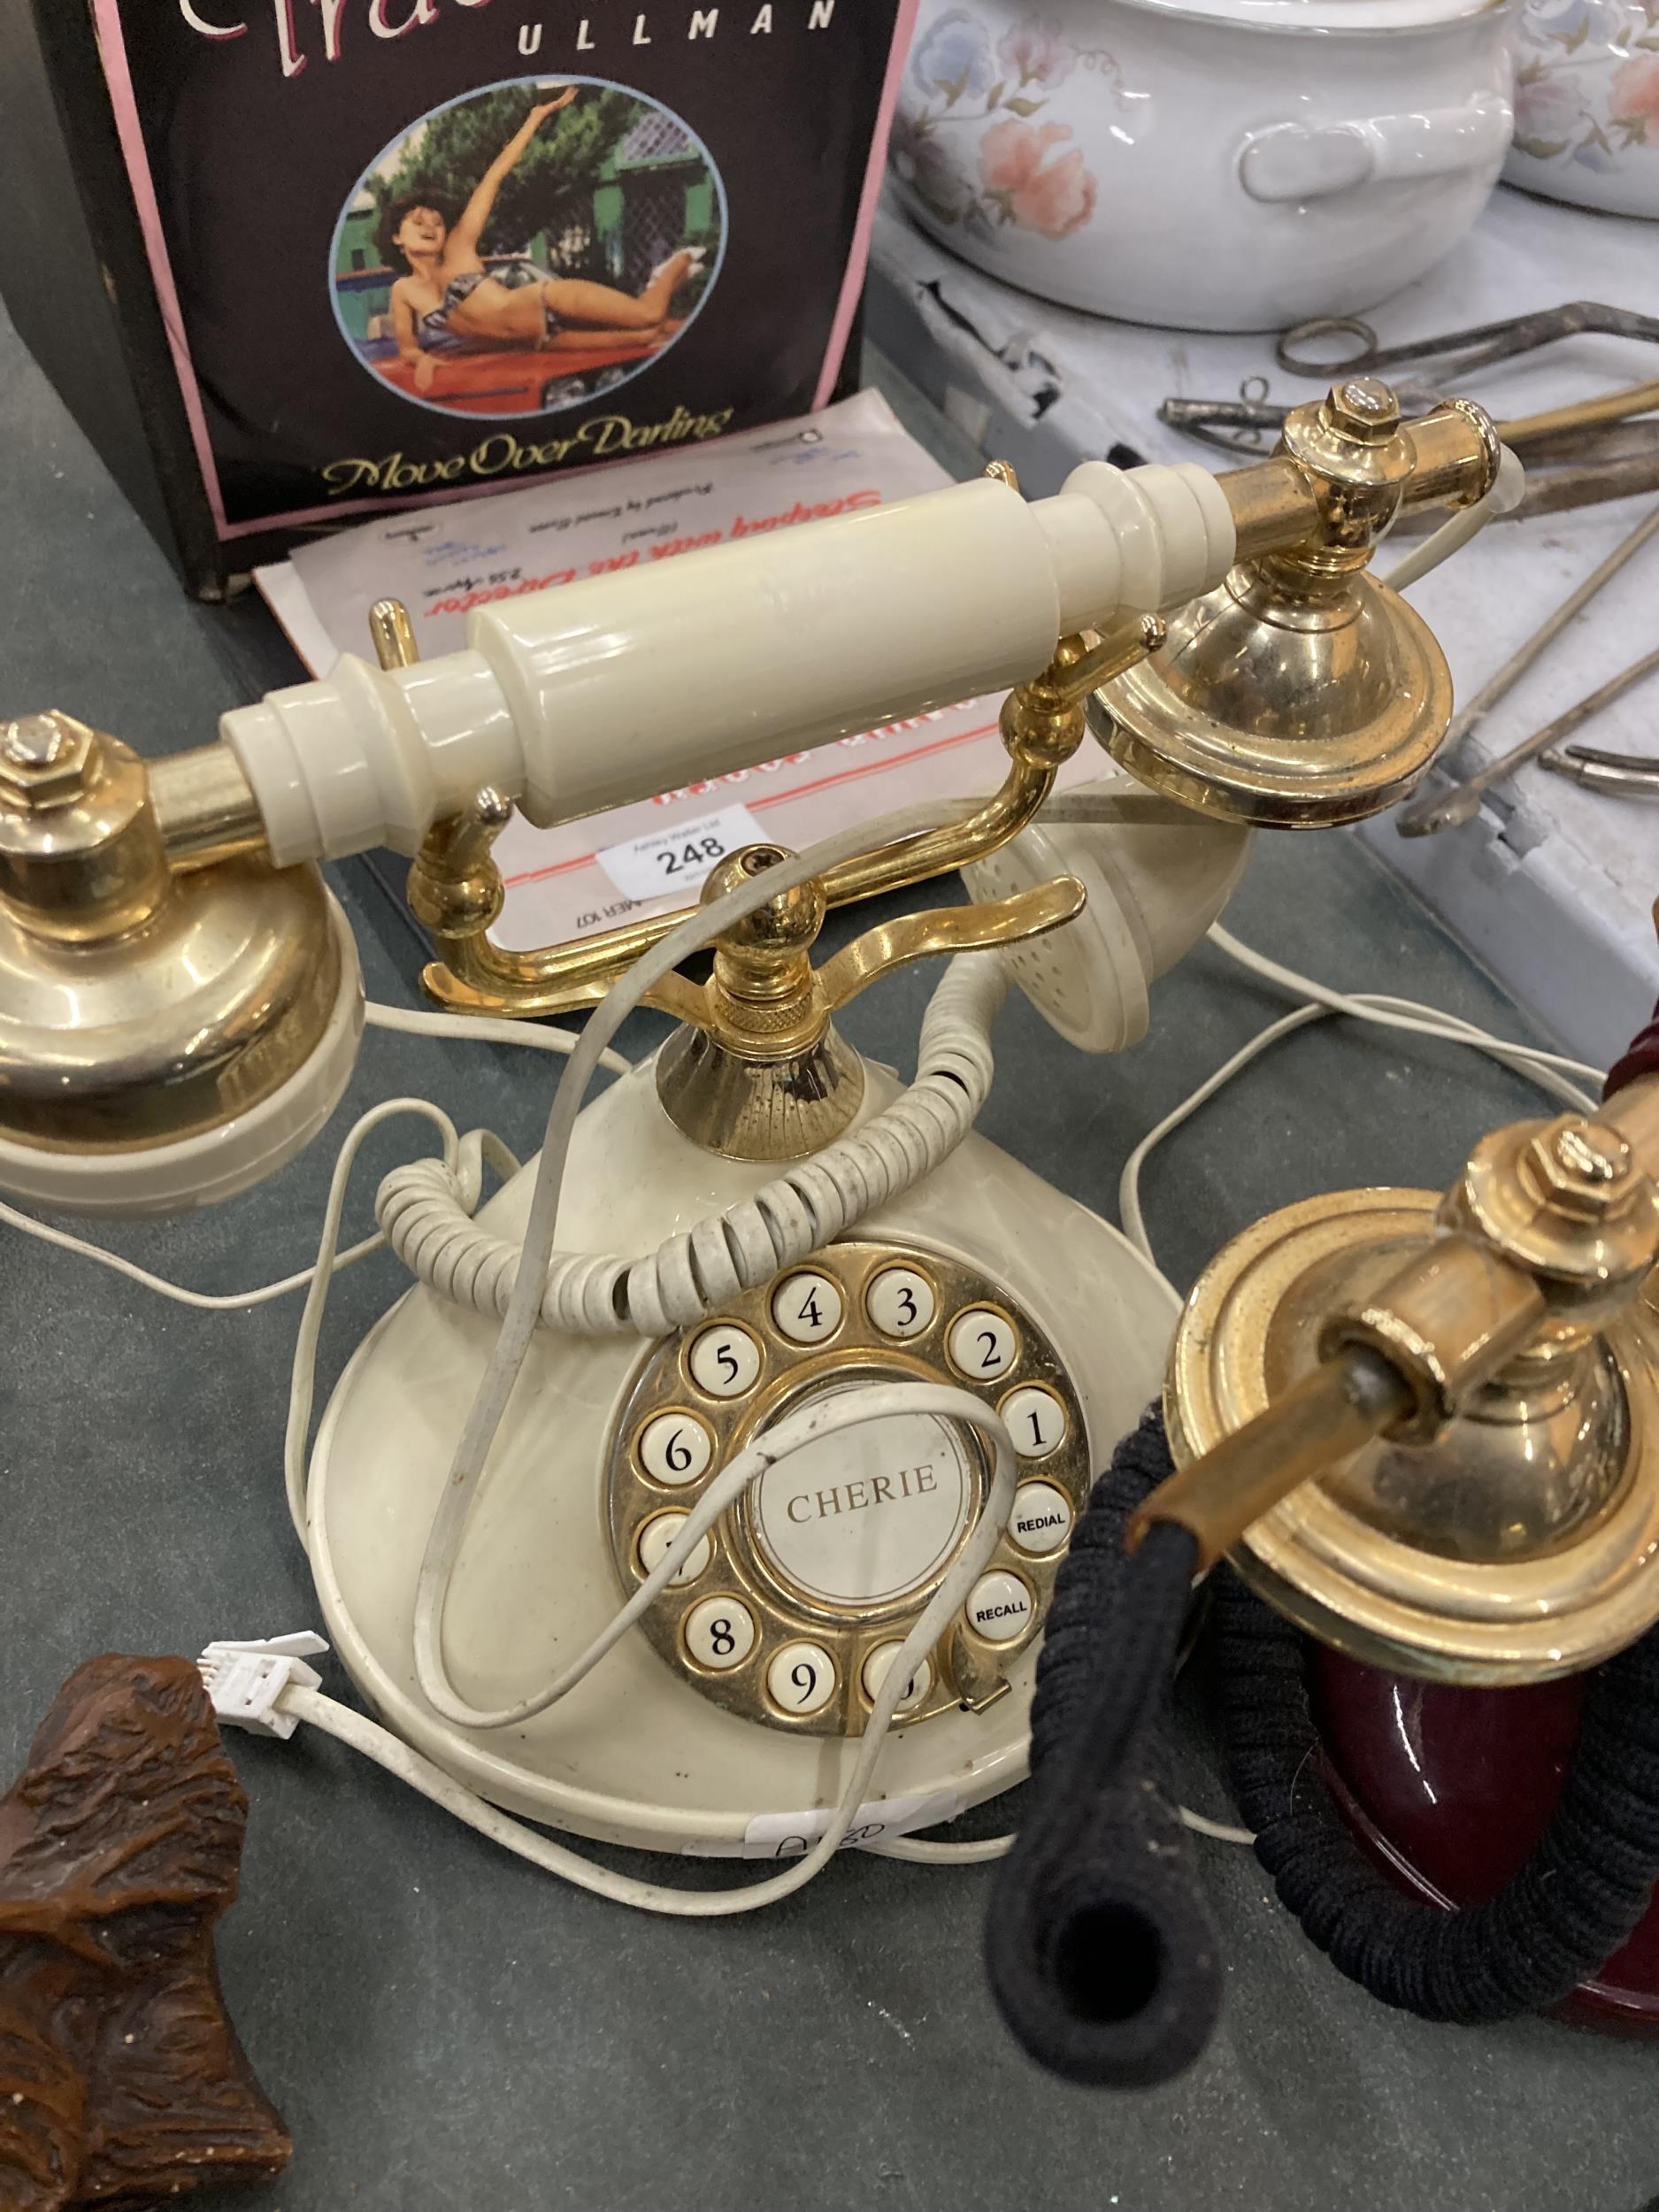 TWO RETRO DIAL UP TELEPHONES - Image 3 of 4